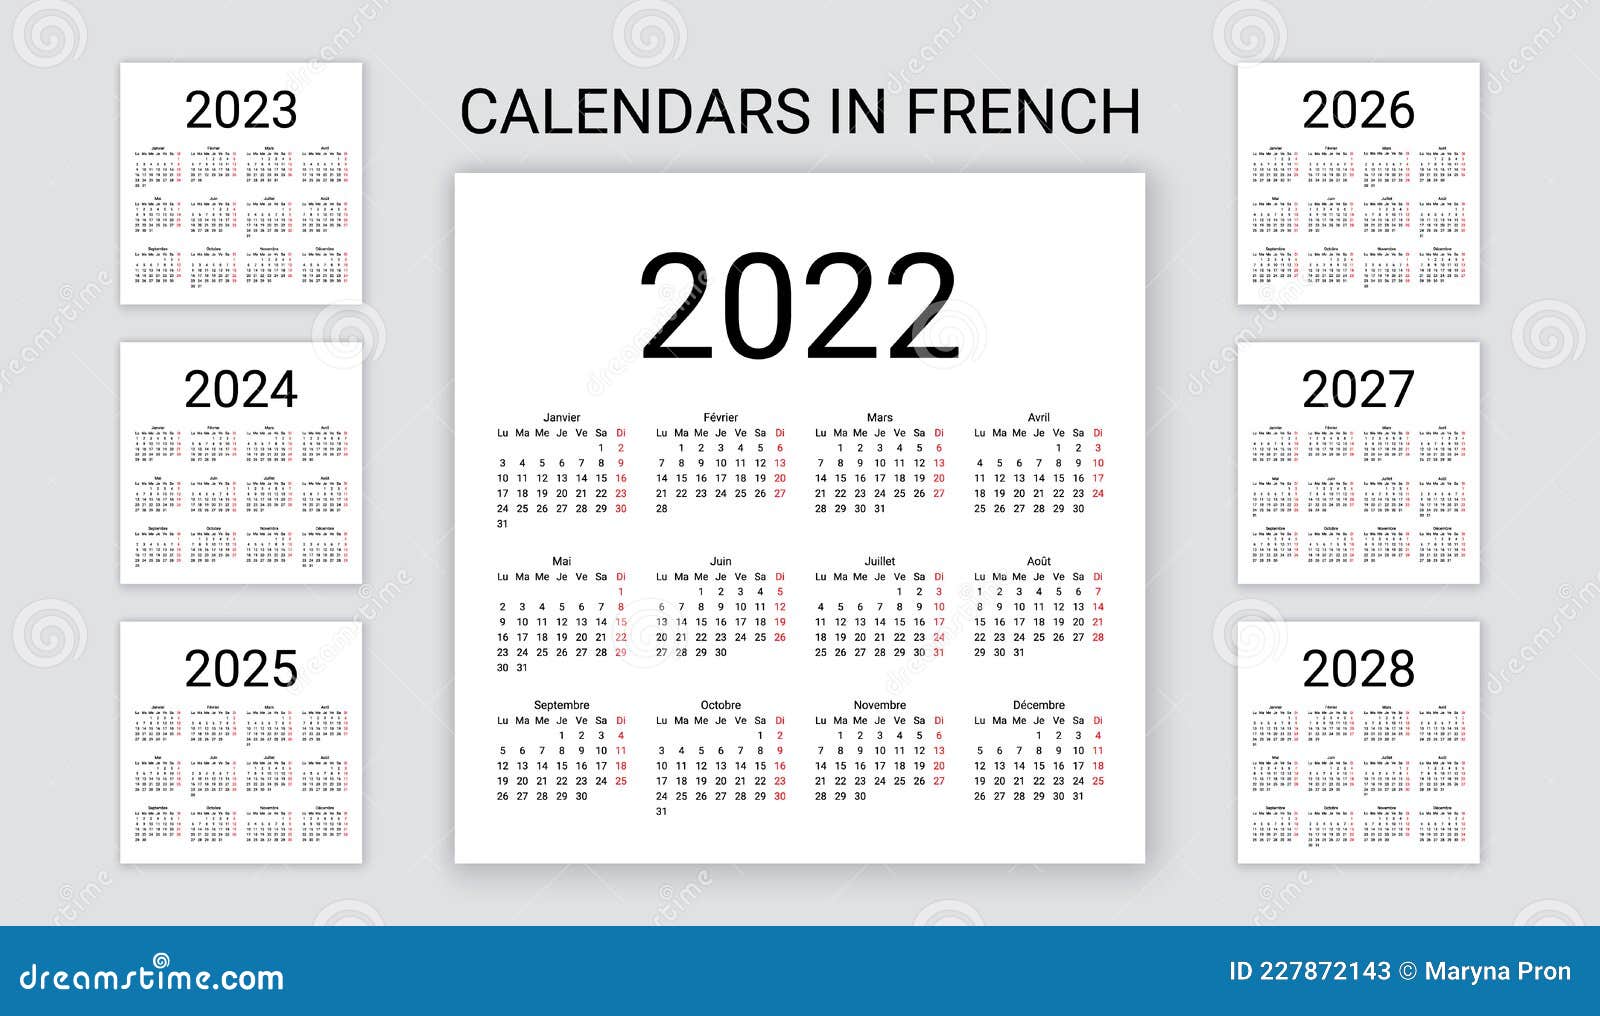 french-calendar-2022-2023-2024-2025-2026-2027-2028-years-vector-illustration-template